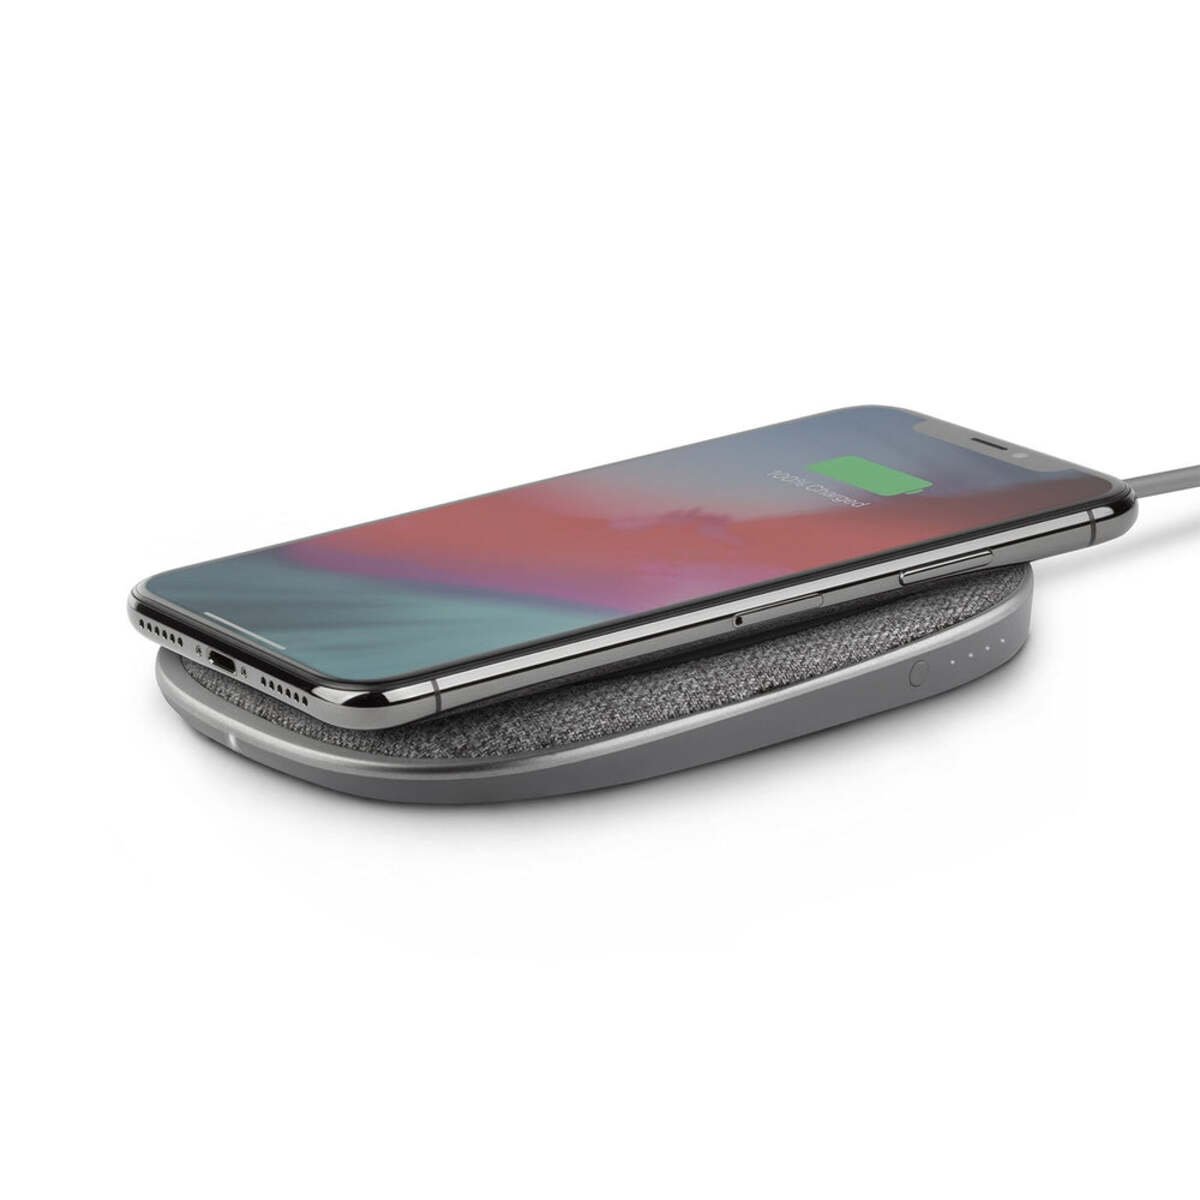 MOSHI Porto Q 5K Portable Battery 5,000 mAh with Built-in 10K Wireless Charger w/h USB-C and USB-A  - Nordic Gray